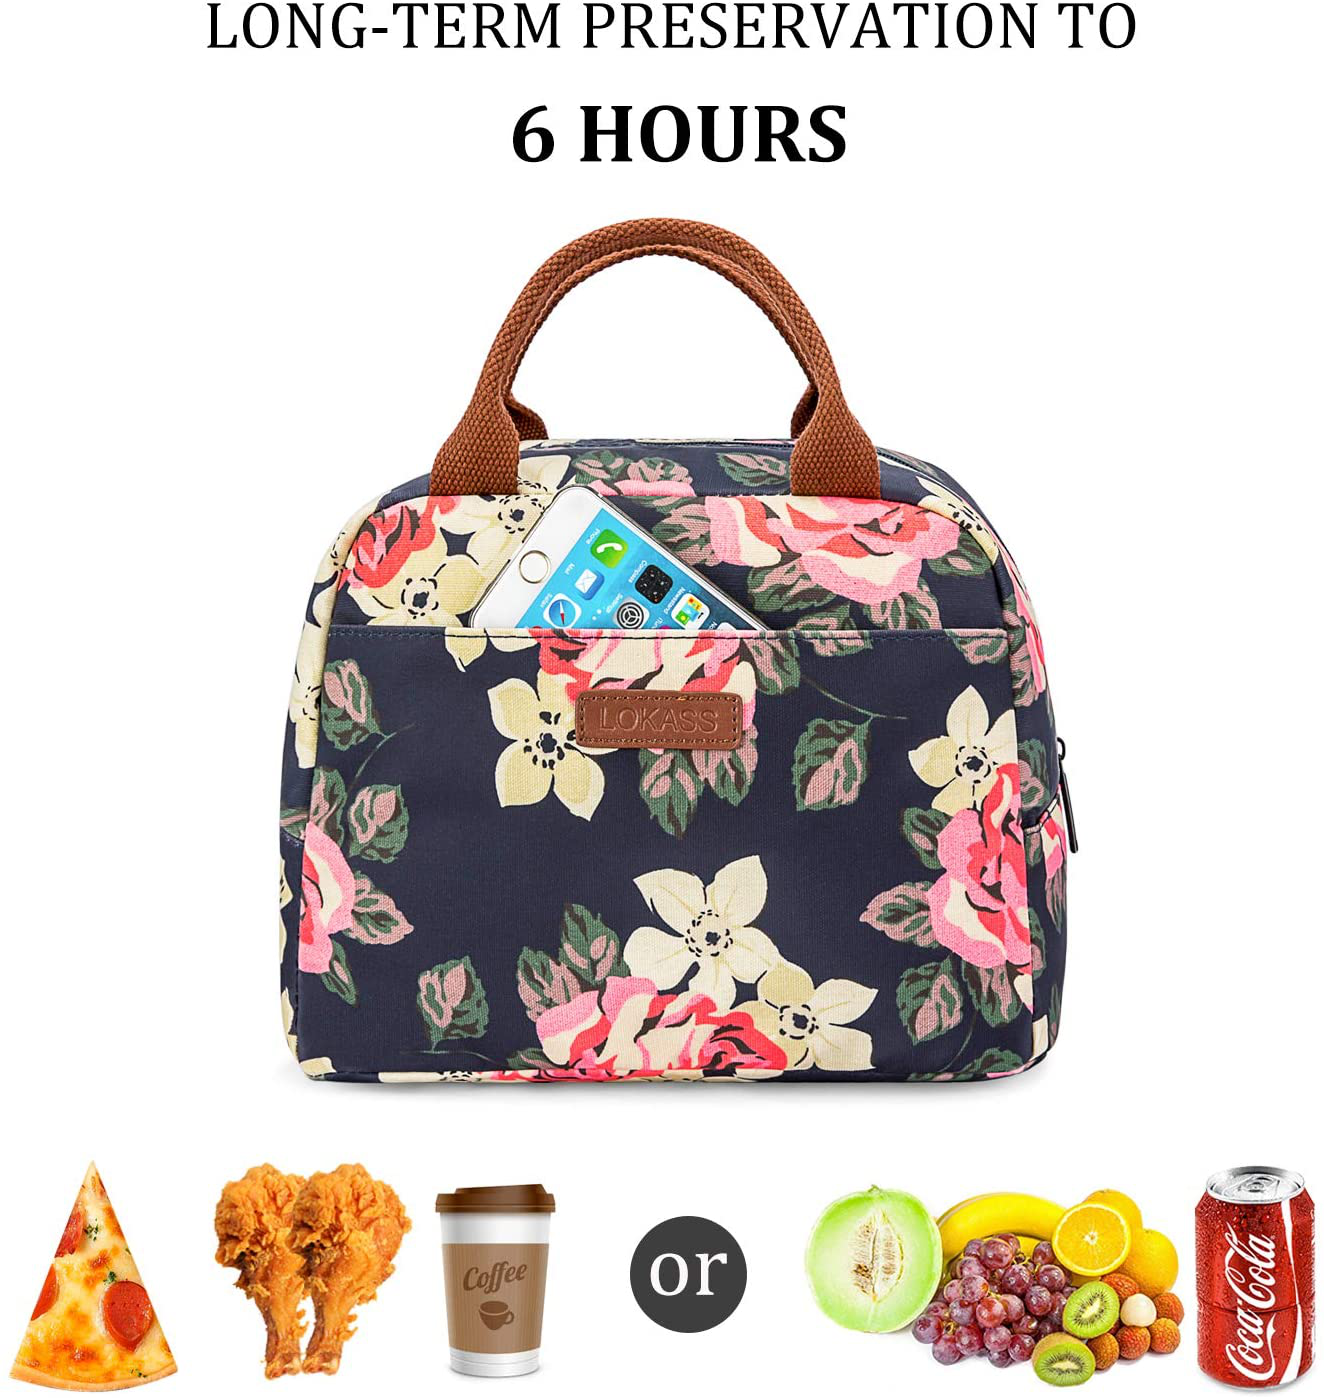 LOKASS Lunch Bag Cooler Bag Women Tote Bag Insulated Lunch Box Water-resistant Thermal Lunch Bag Soft Liner Lunch Bags for women /Picnic/Boating/Beach/Fishing/Work (Peony)